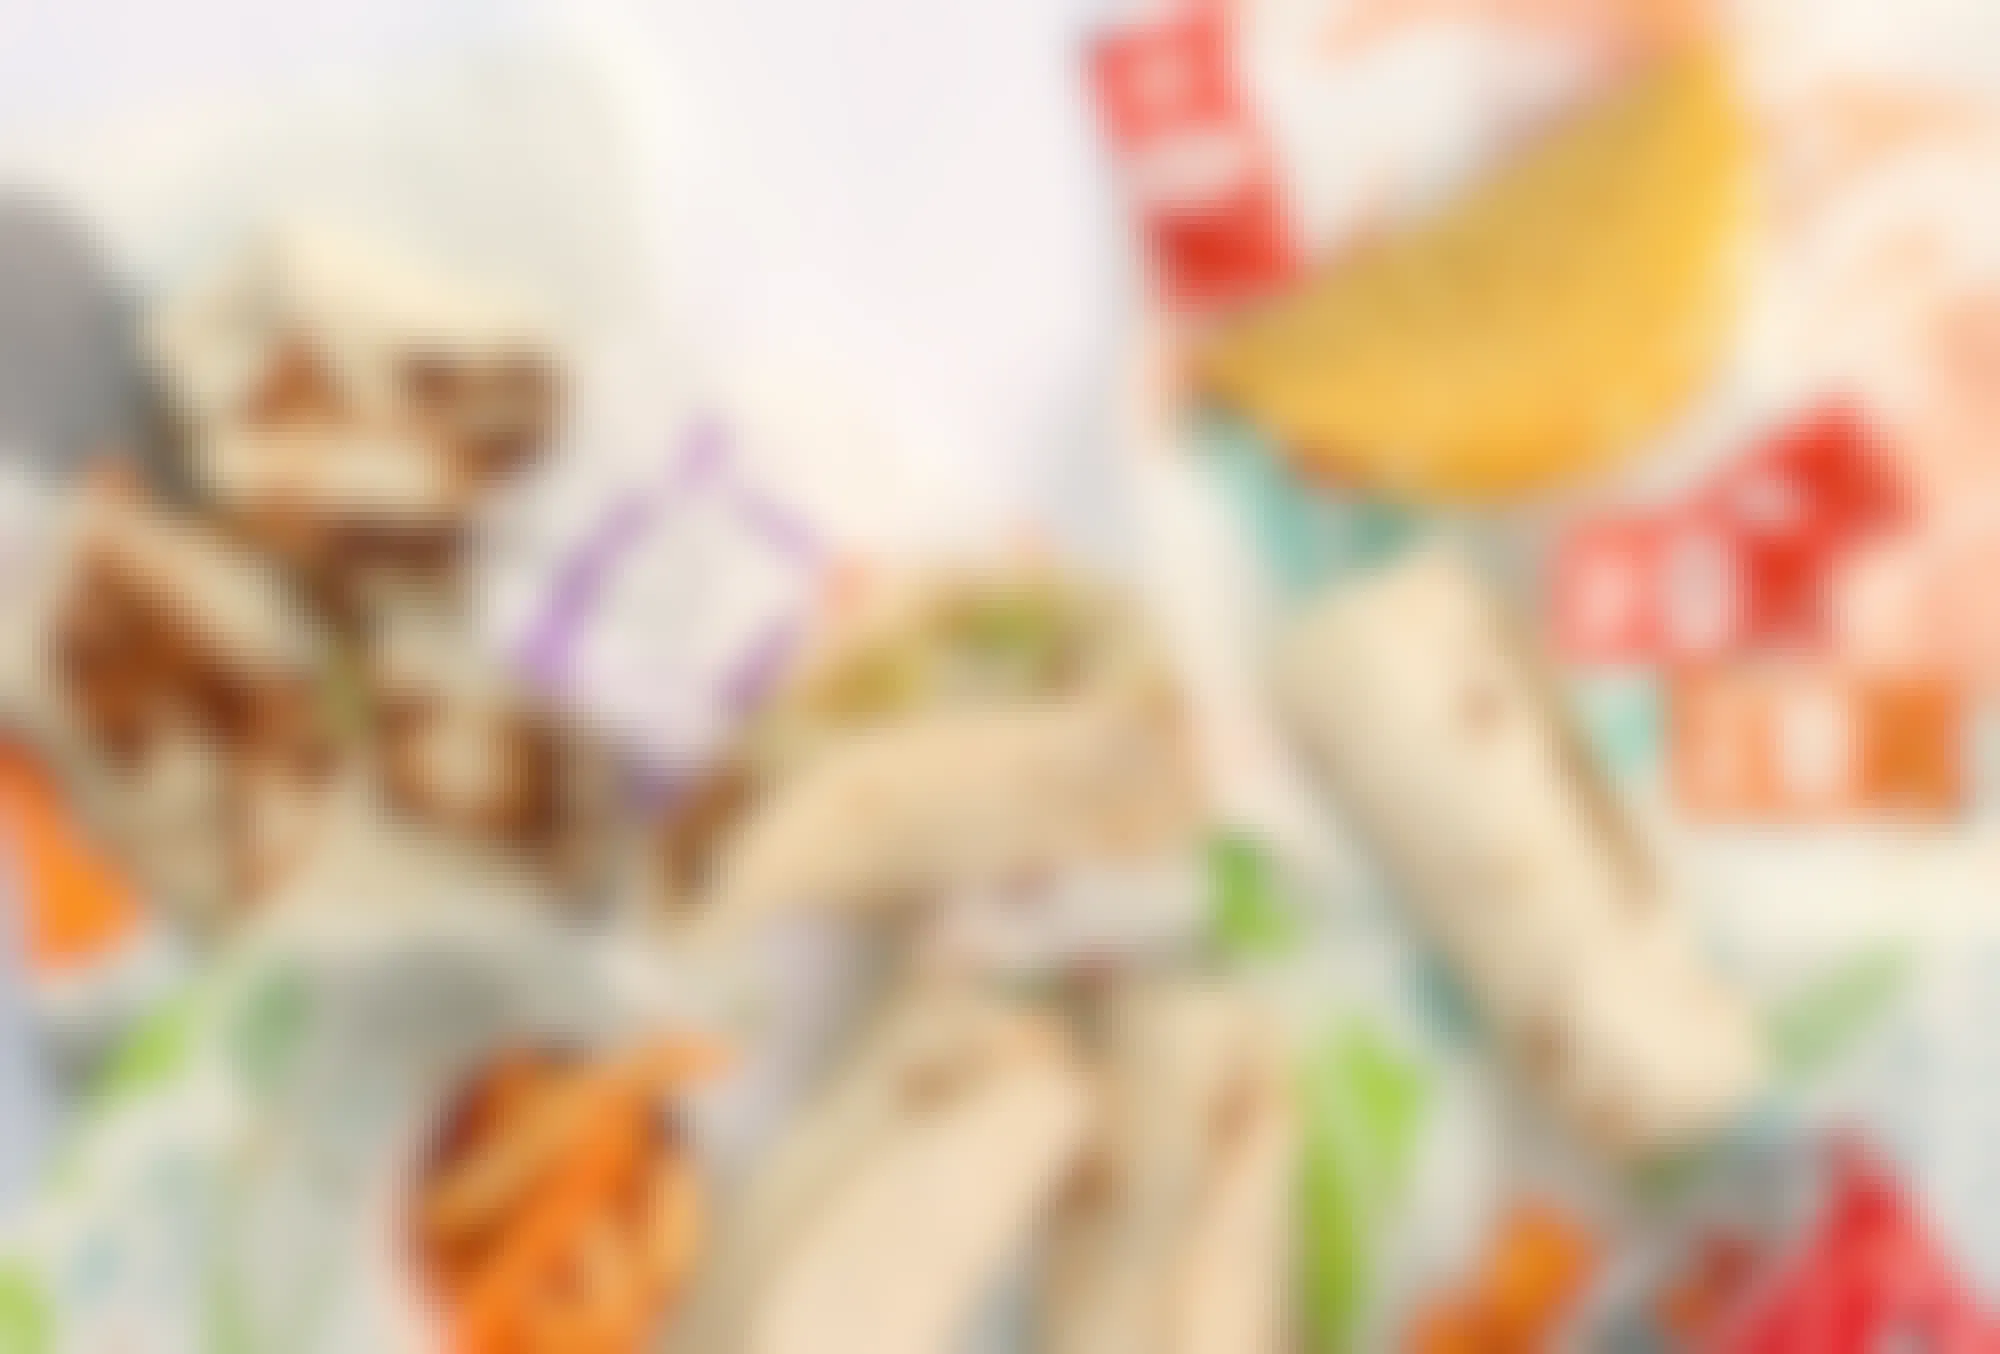 Taco Bell Subscription Gets You 1 Taco Per Day: Here's How it Works